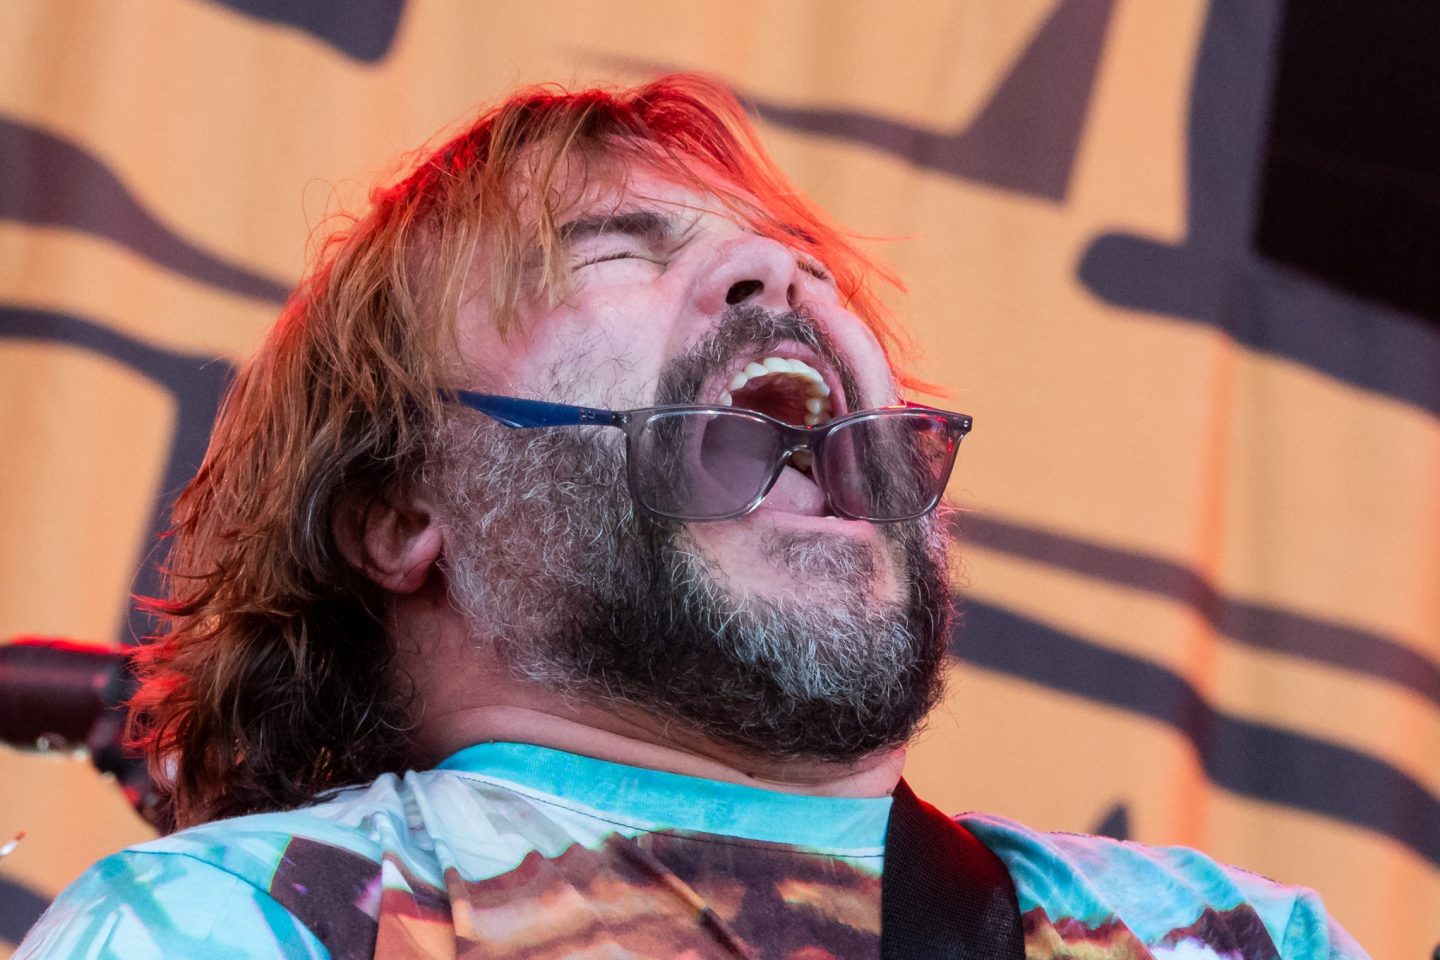 Jack Black letting it rip on stage, with his sunglasses in his mouth